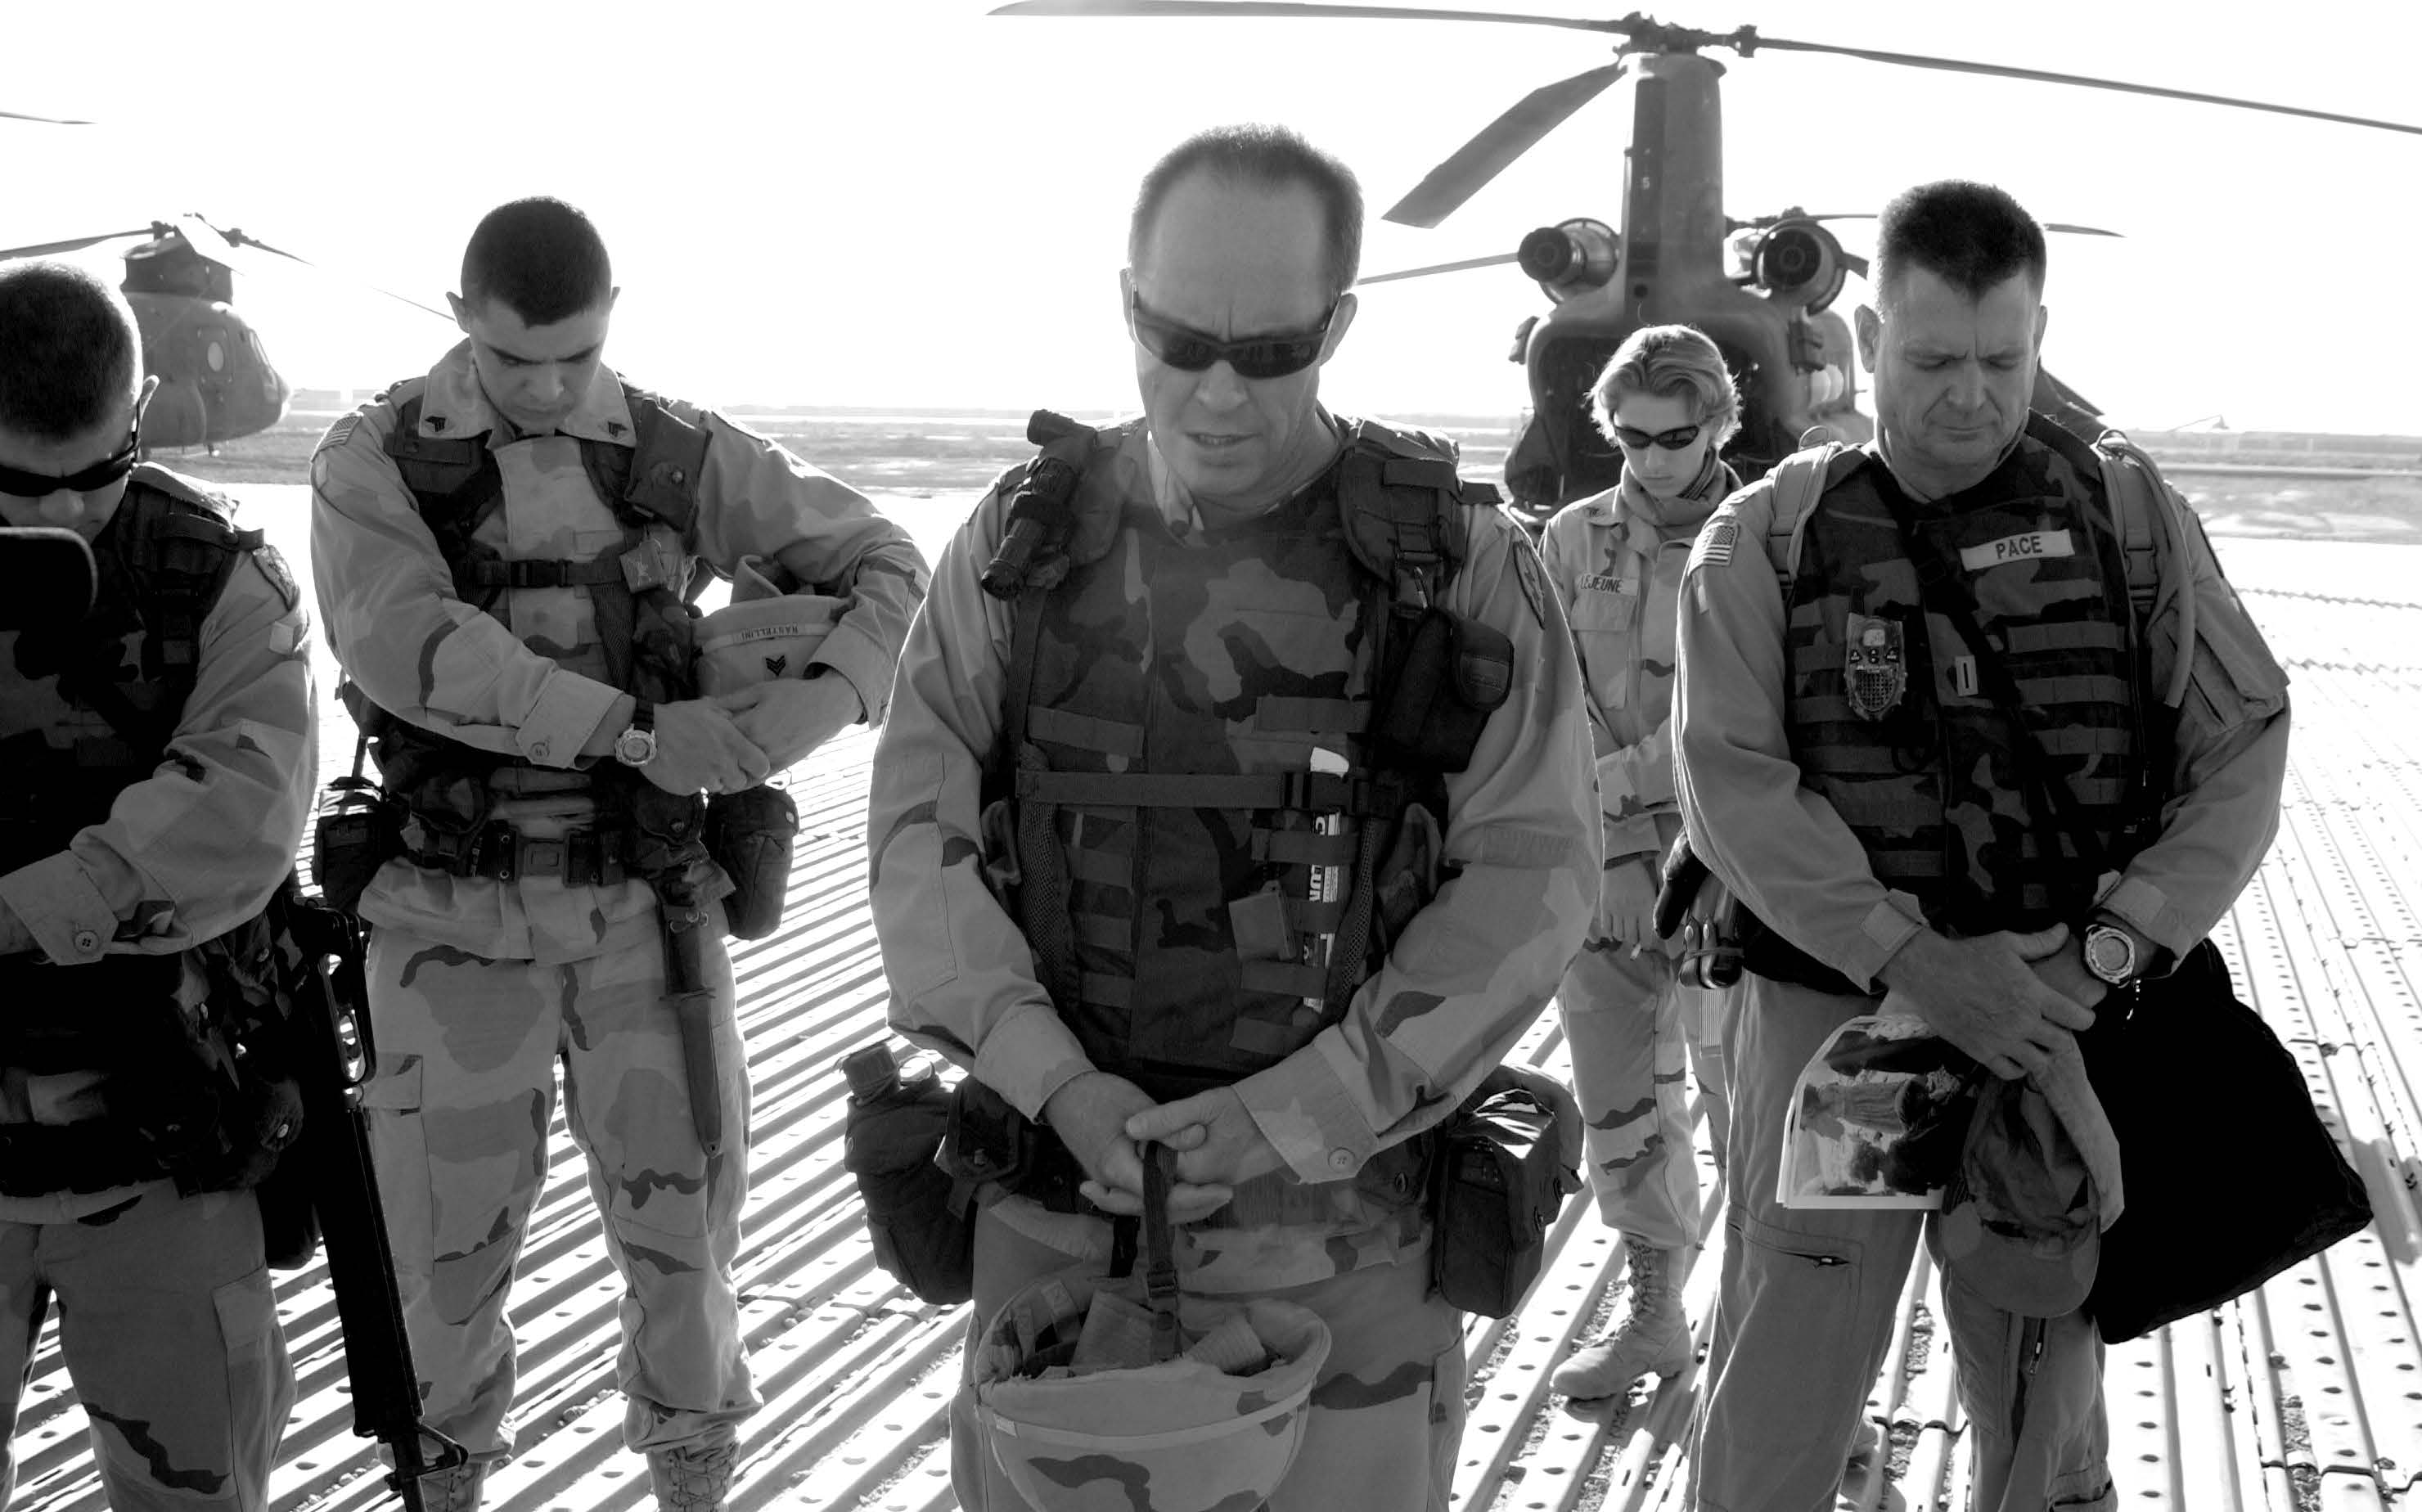 Chaplain Mark Allison (center) is shown leading a group in prayer before a mission. Courtesy of Mark Allison.